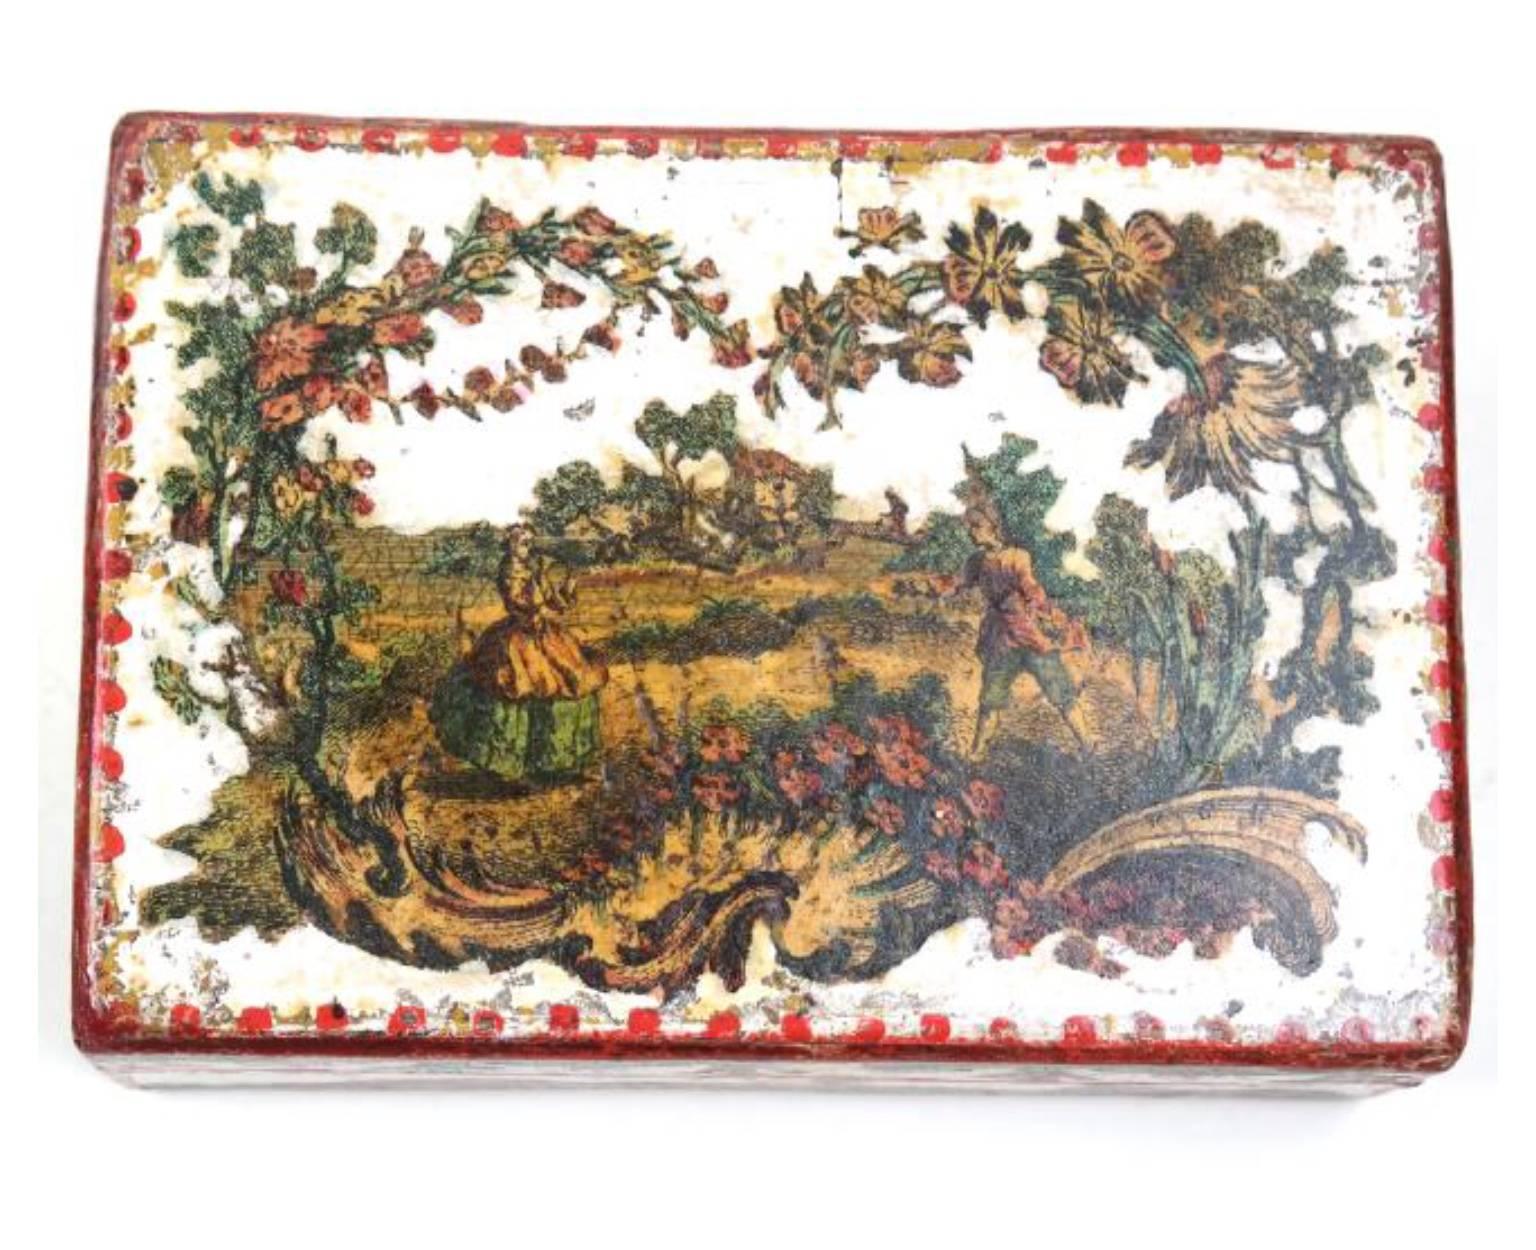 The papier mâché box depicting a landscape scene on a white ground with red trim on all sides.